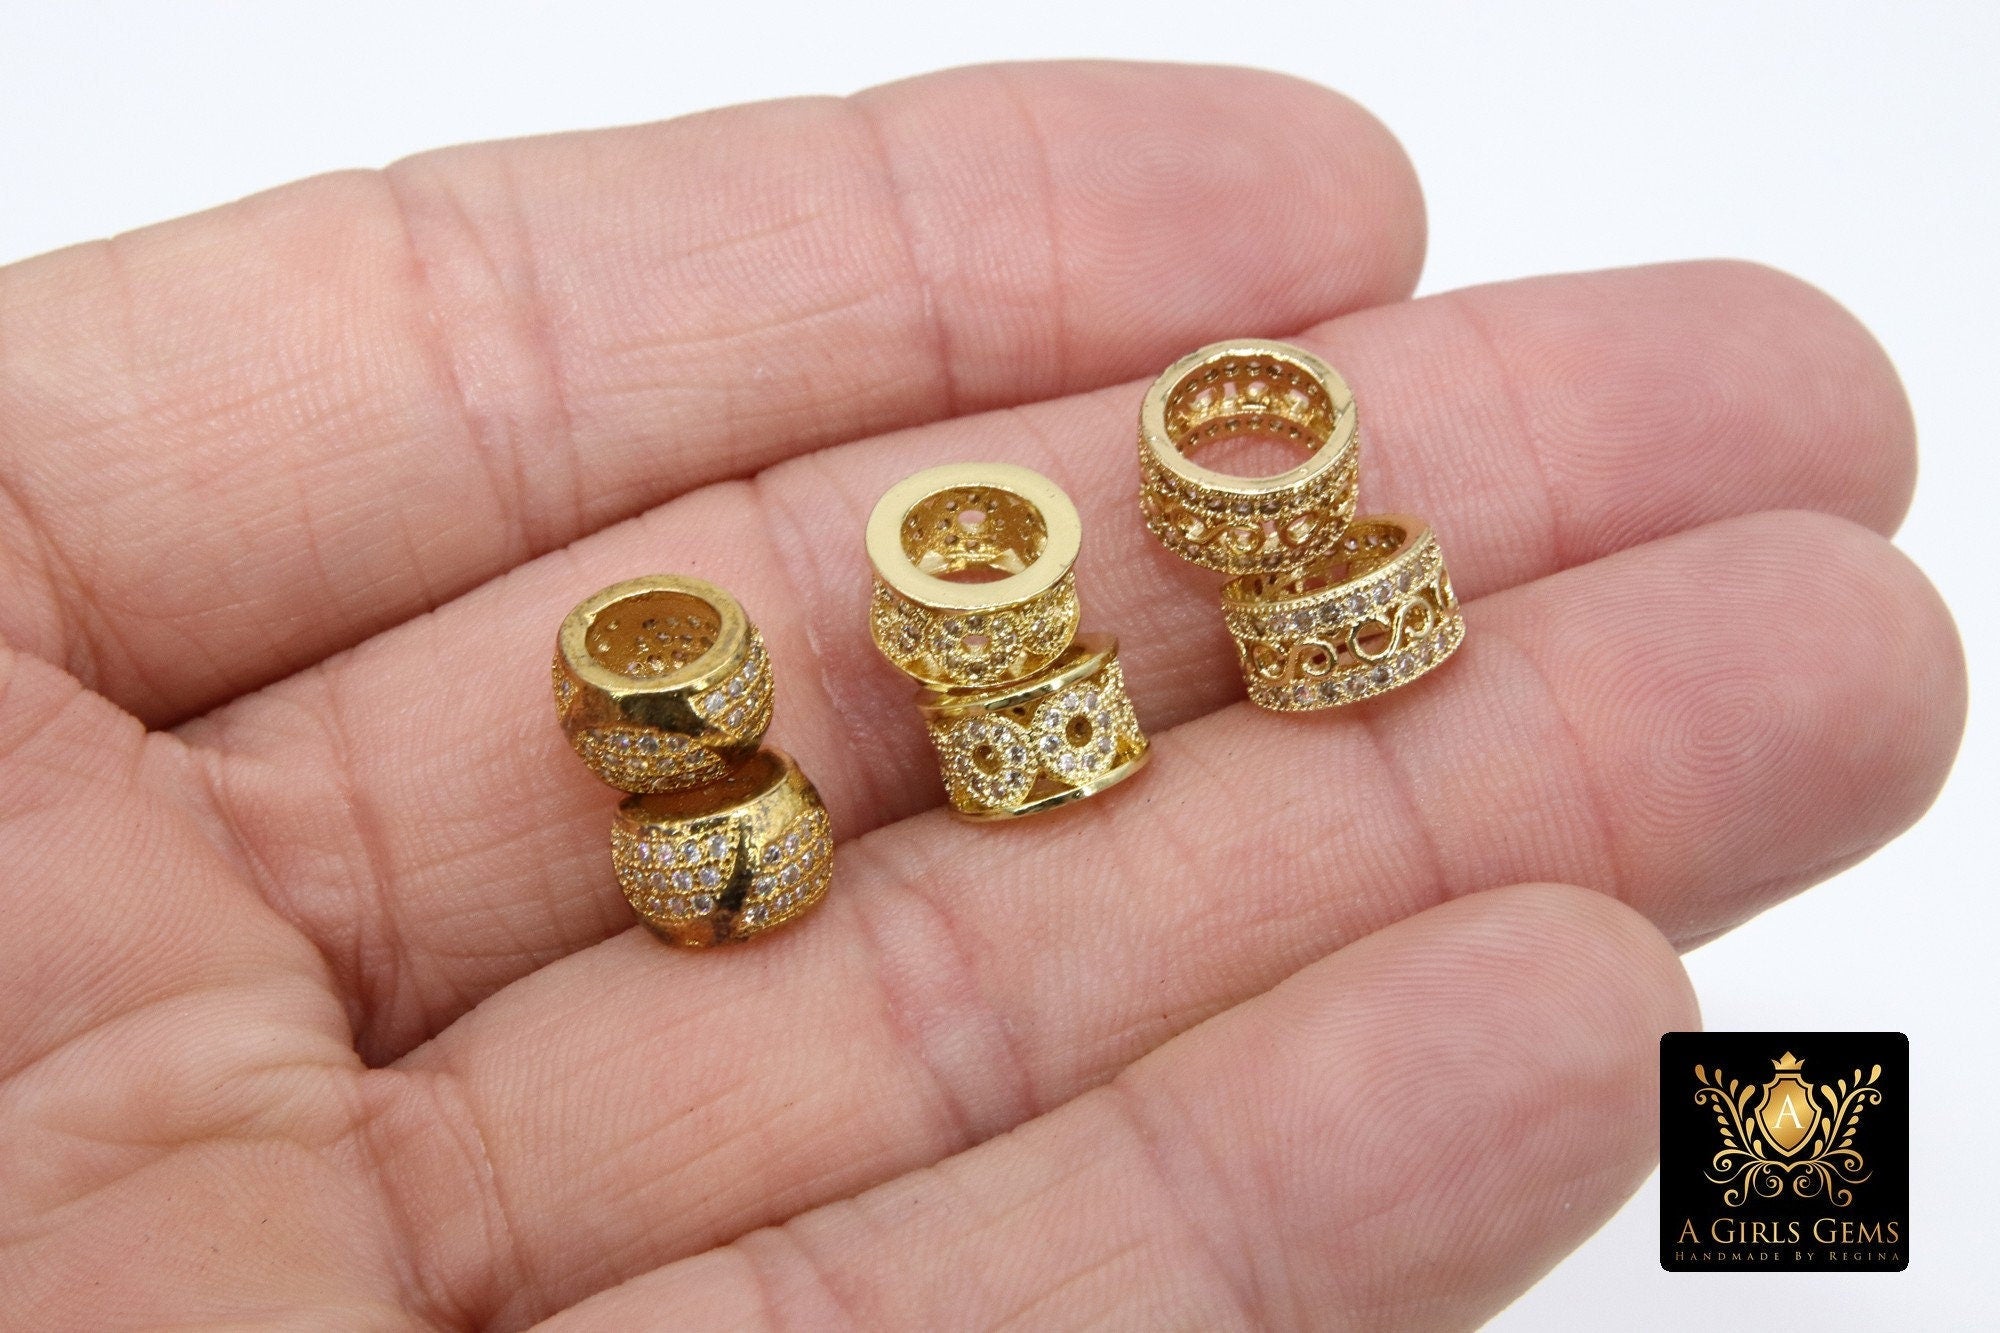 CZ Pave Gold Large Hole Tube Bead, Big Hole Bead Spacer Beads in DIY Jewelry, 10 mm with 5.0-6.0 mm Holes - A Girls Gems